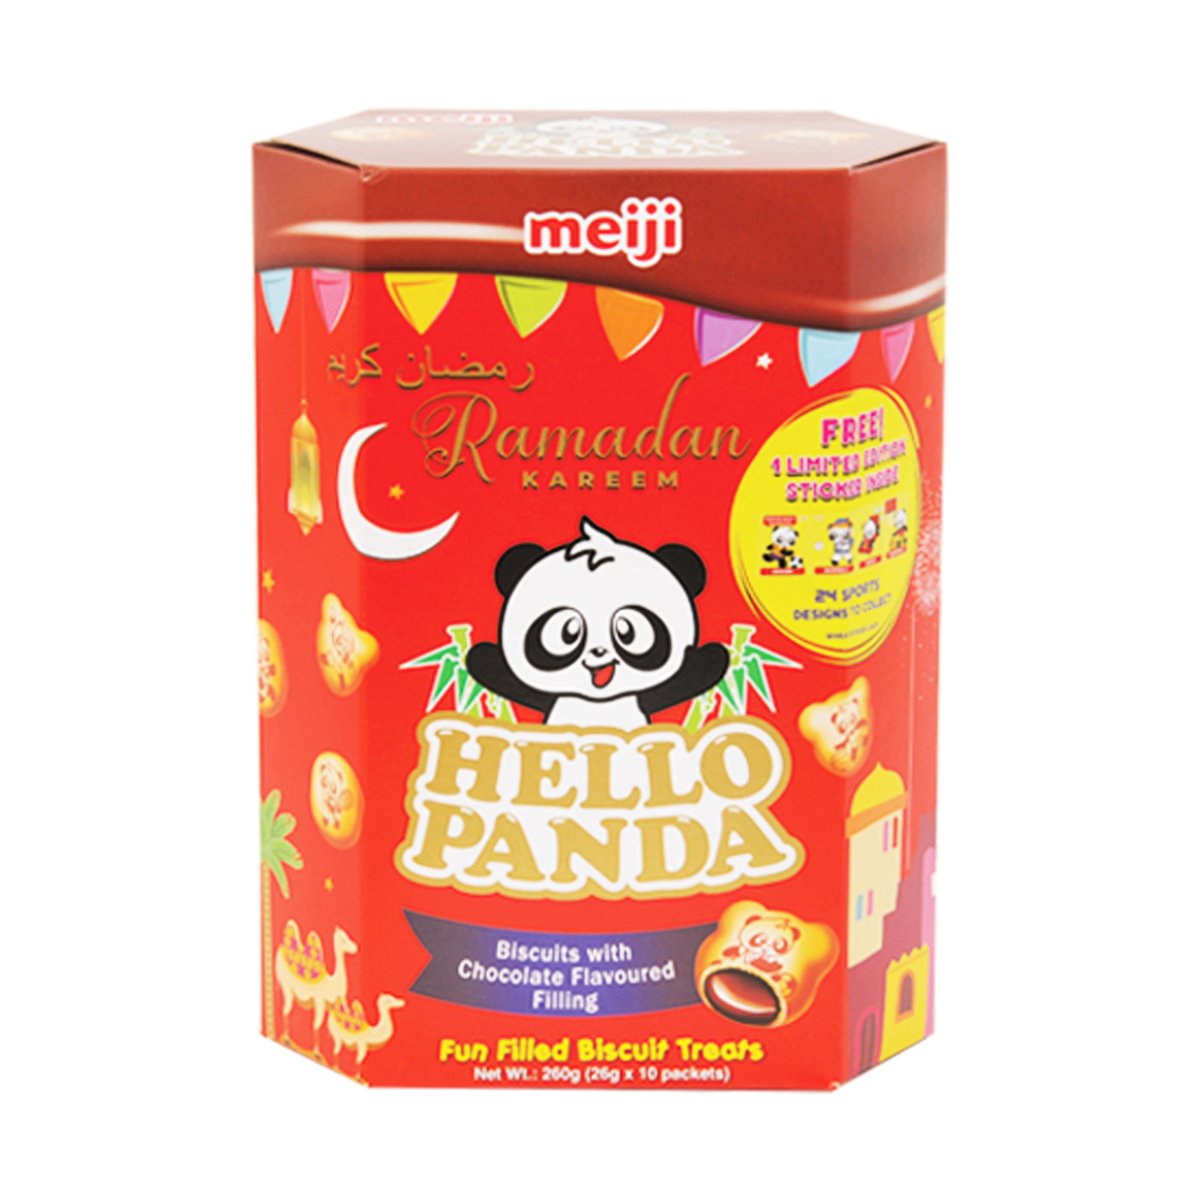 Meiji Hello Chocolate Flavoured Filling Panda Biscuits 260g